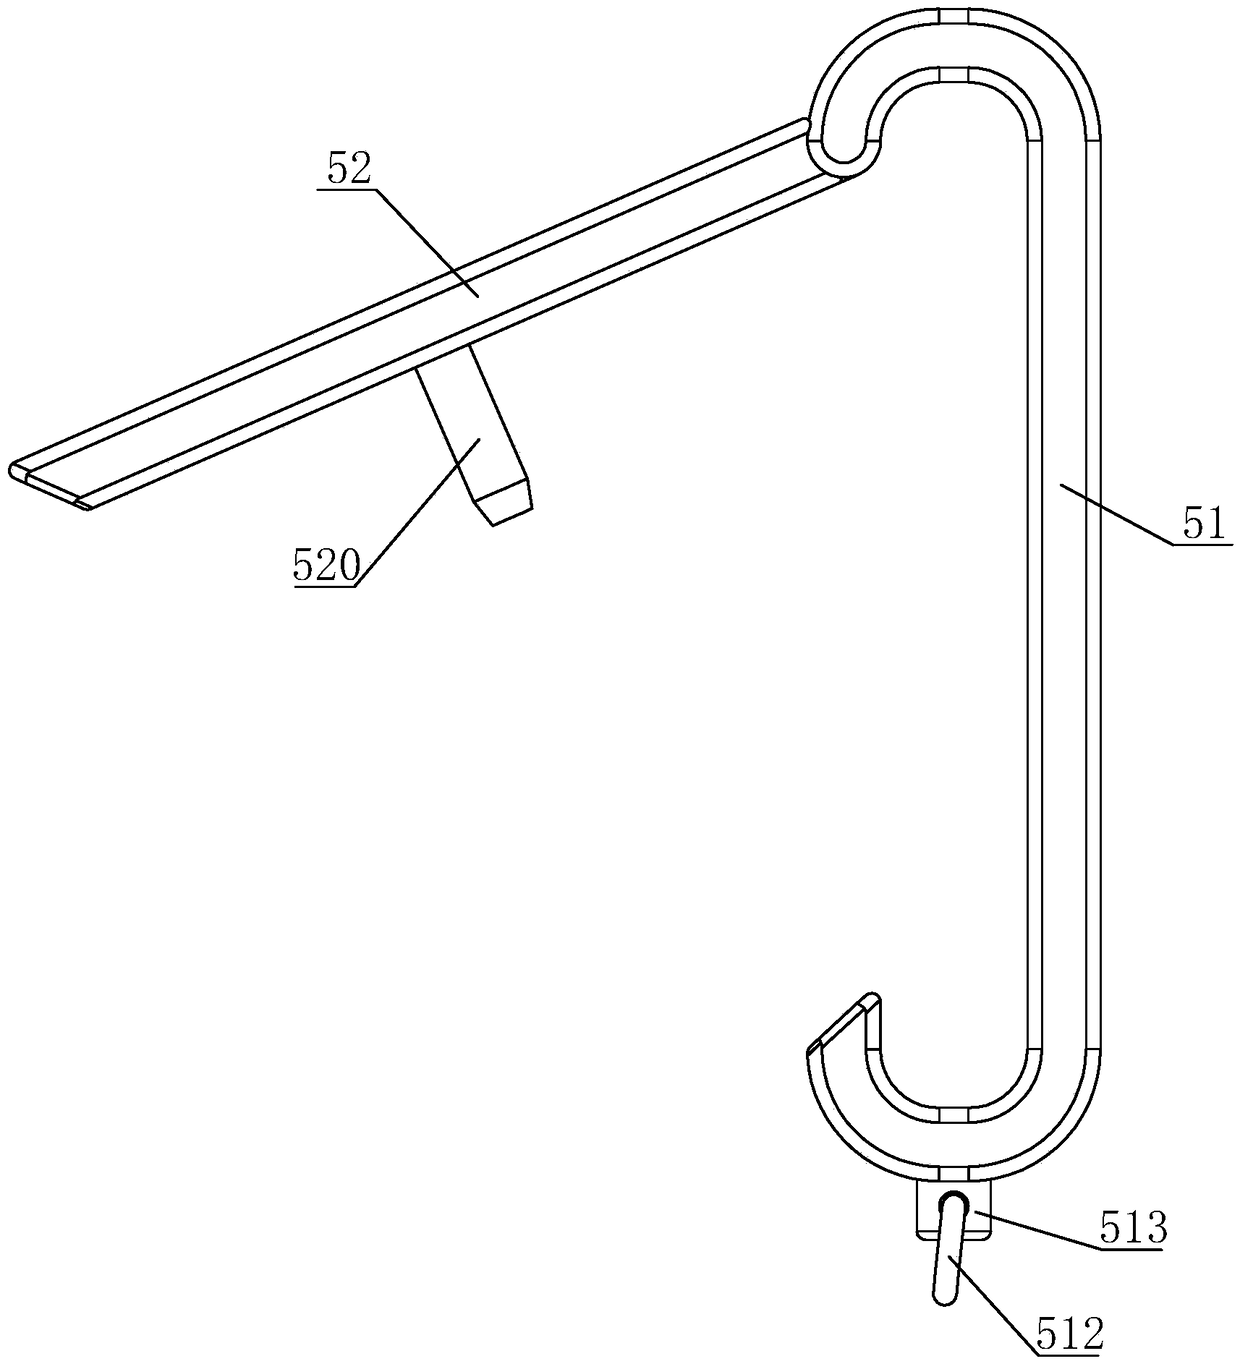 Pelvic floor muscle postoperative lifting support device